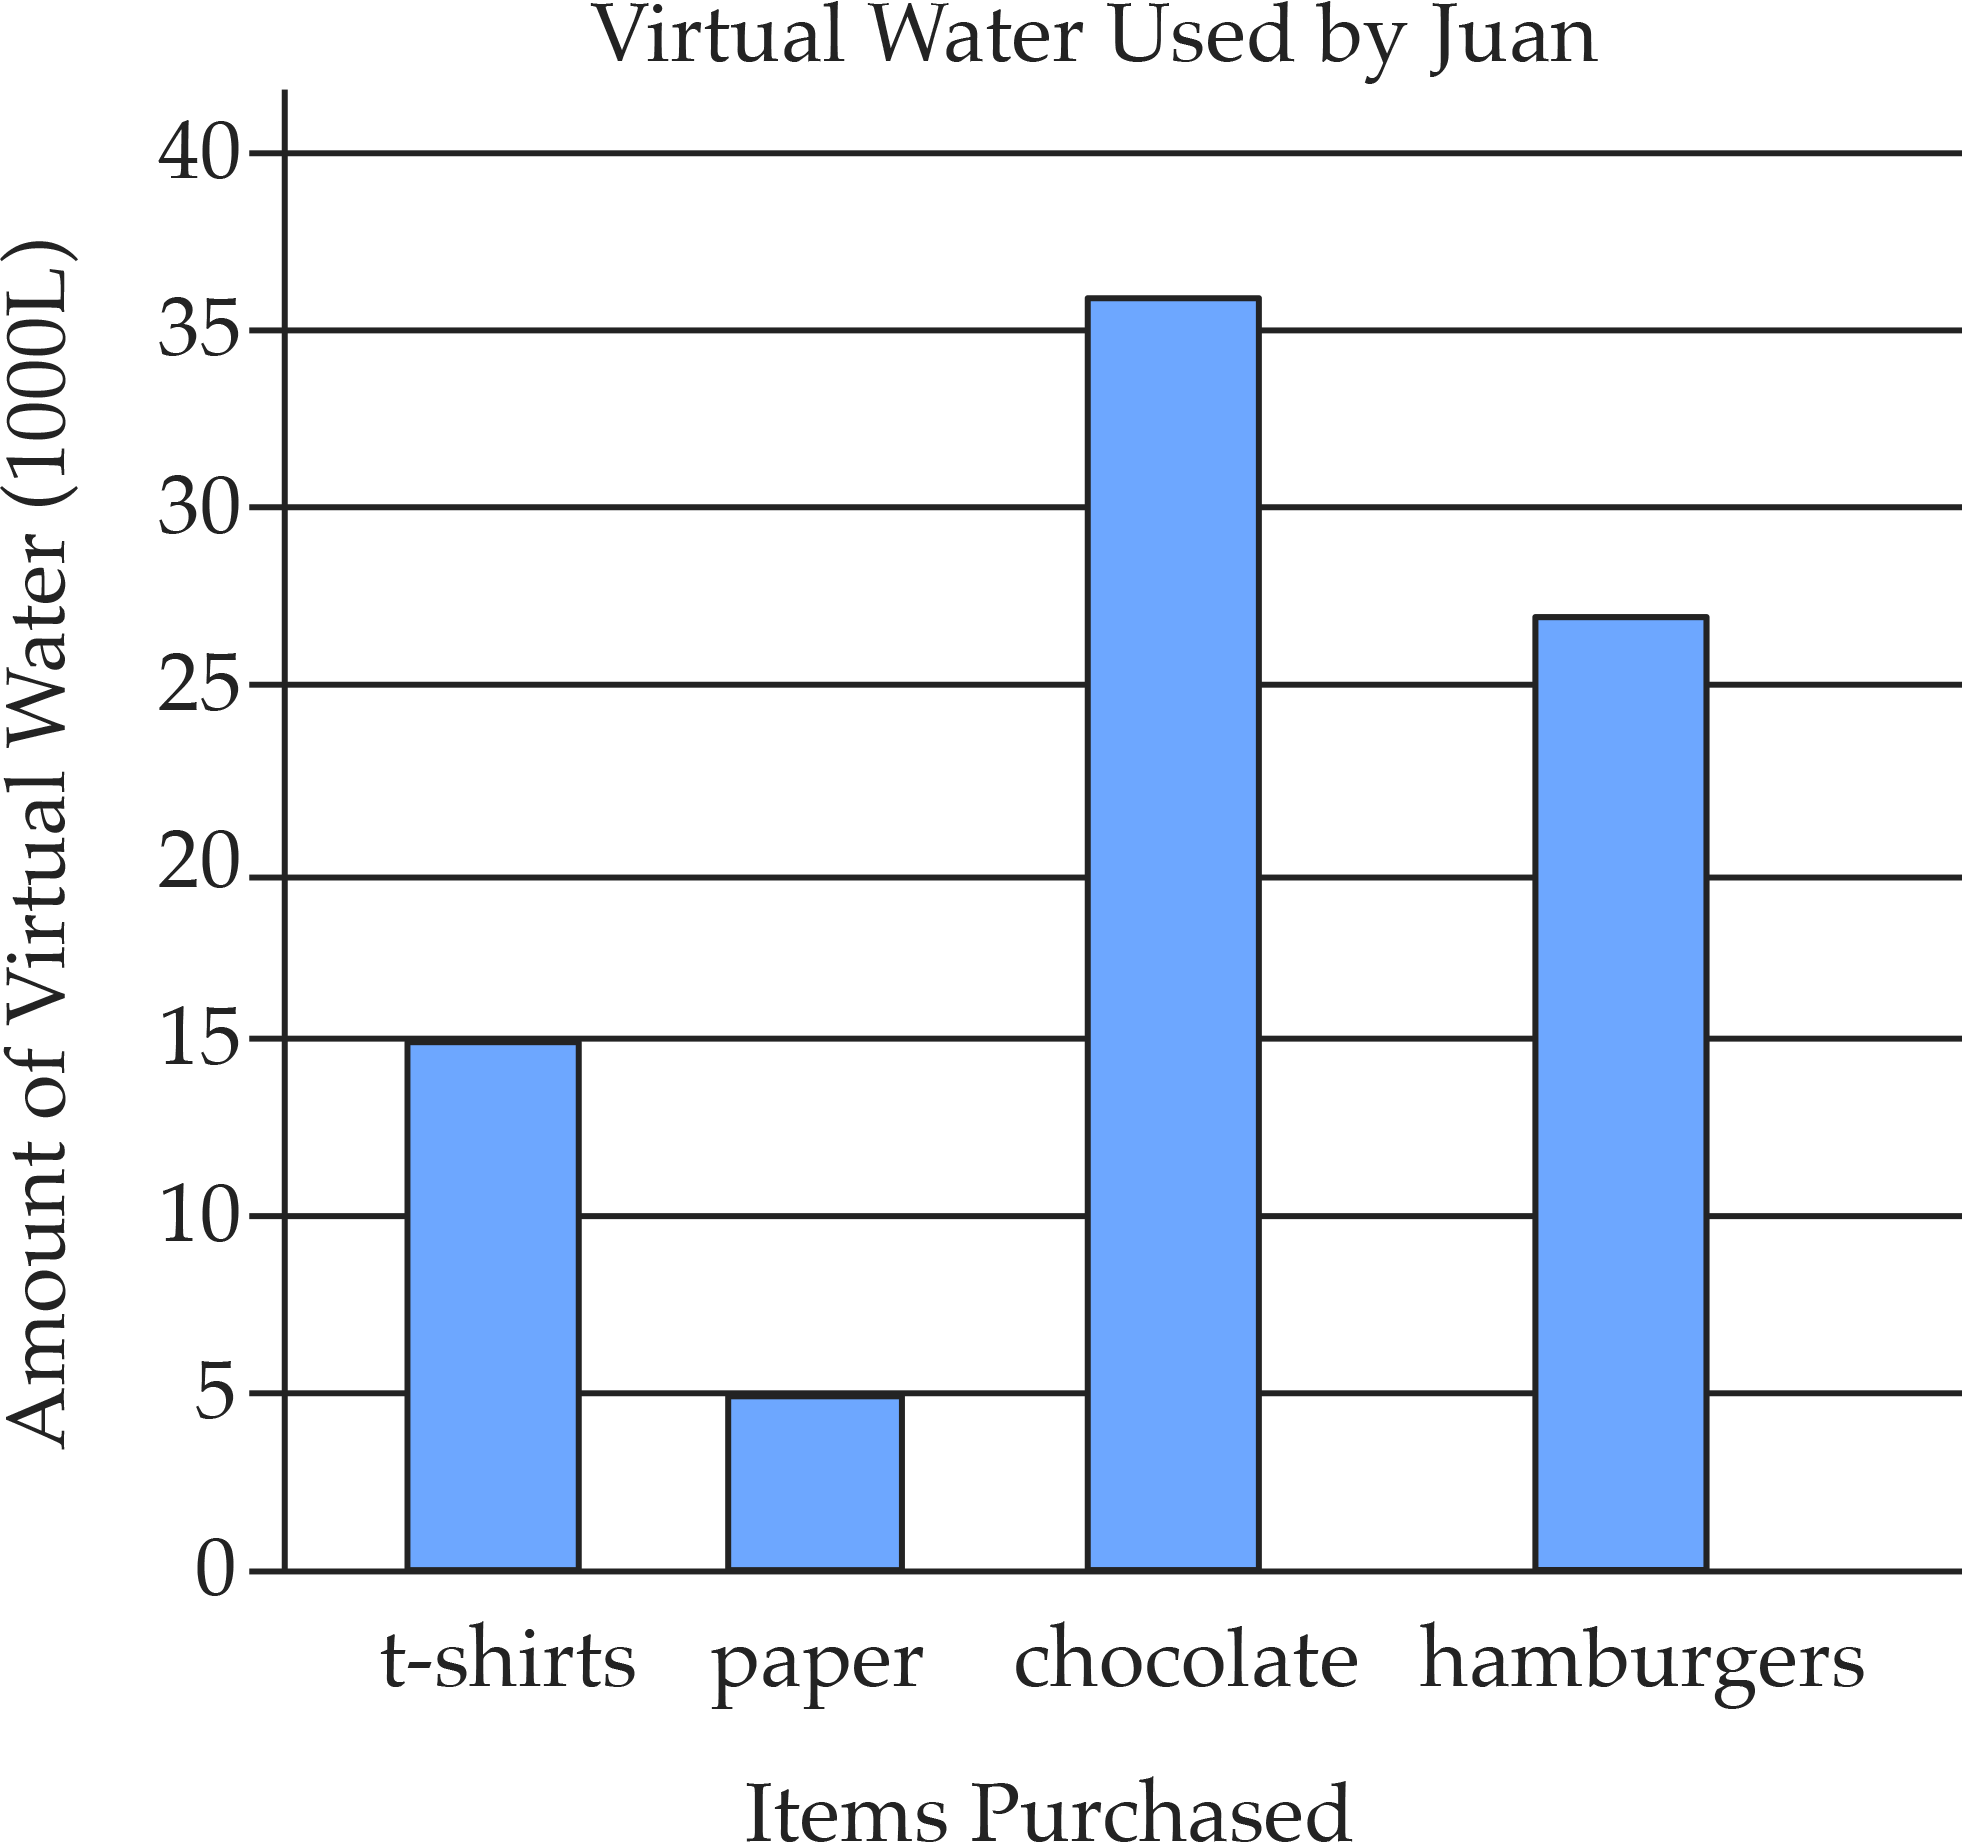 A bar graph with Items Purchased along the horizontal axis and Amount of Virtual Water measured in one thousand litres along the vertical.